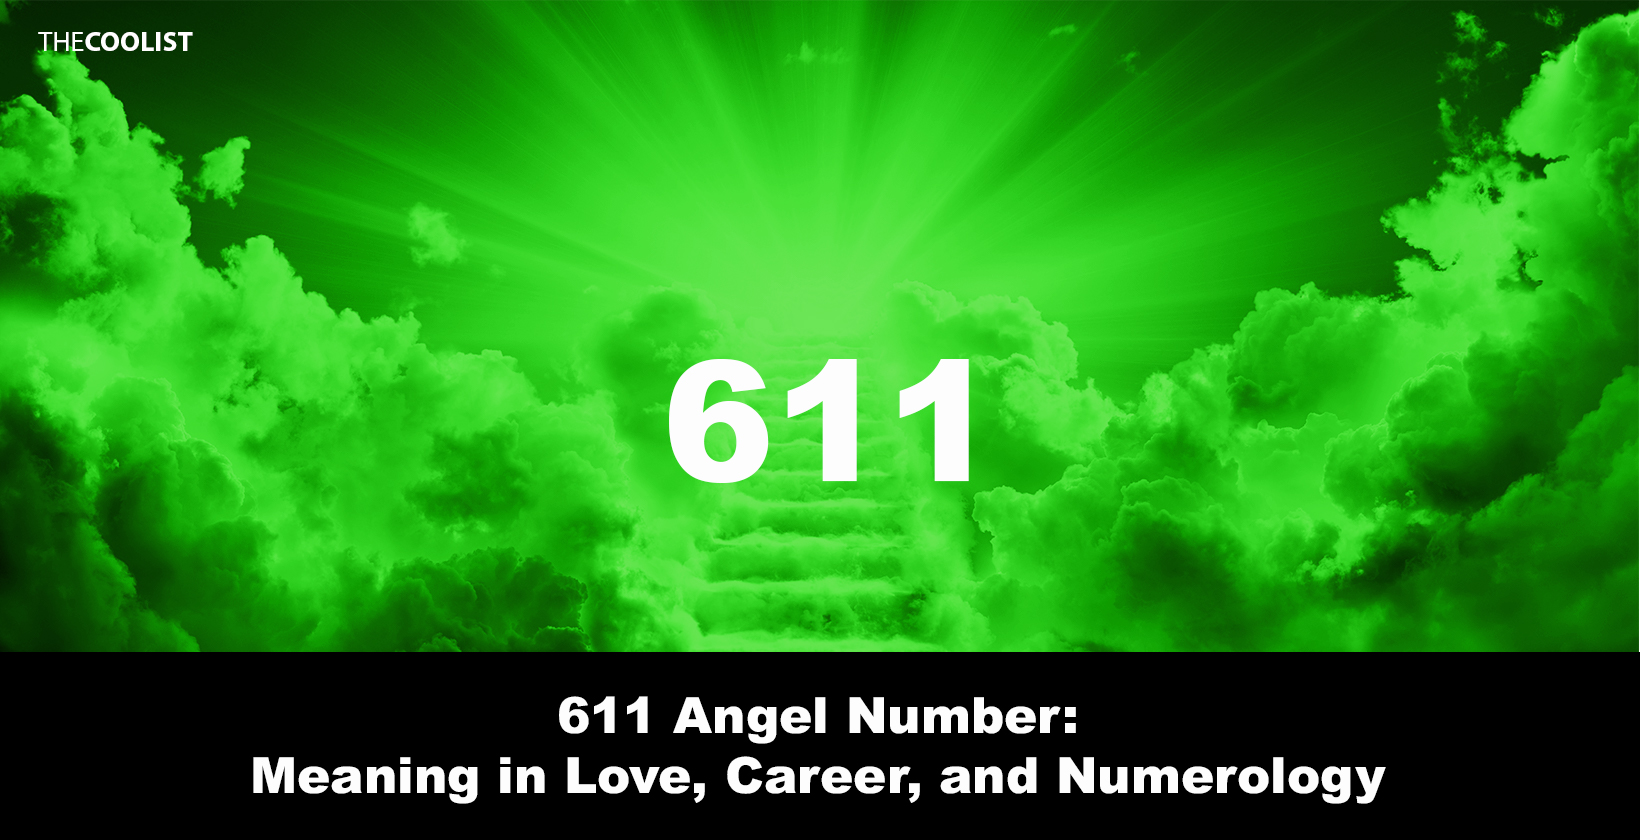 611 Angel Number: Meaning in Love, Career, and Numerology